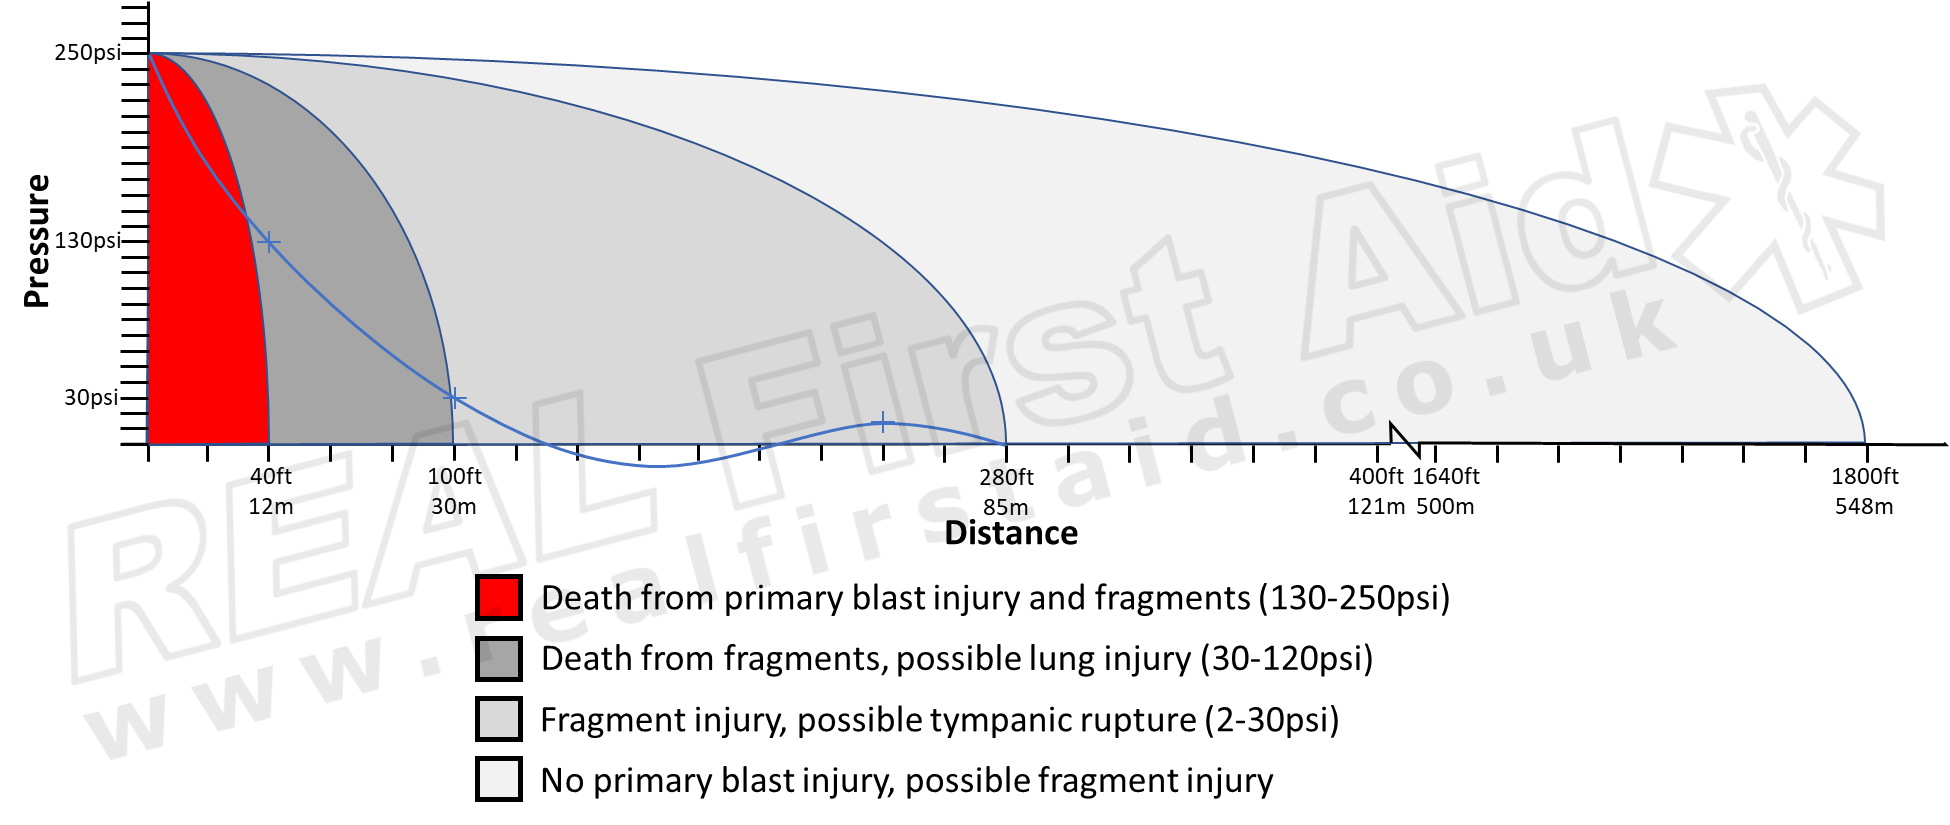 What Have We Learned About Blast Injury Since the Days of “Shell